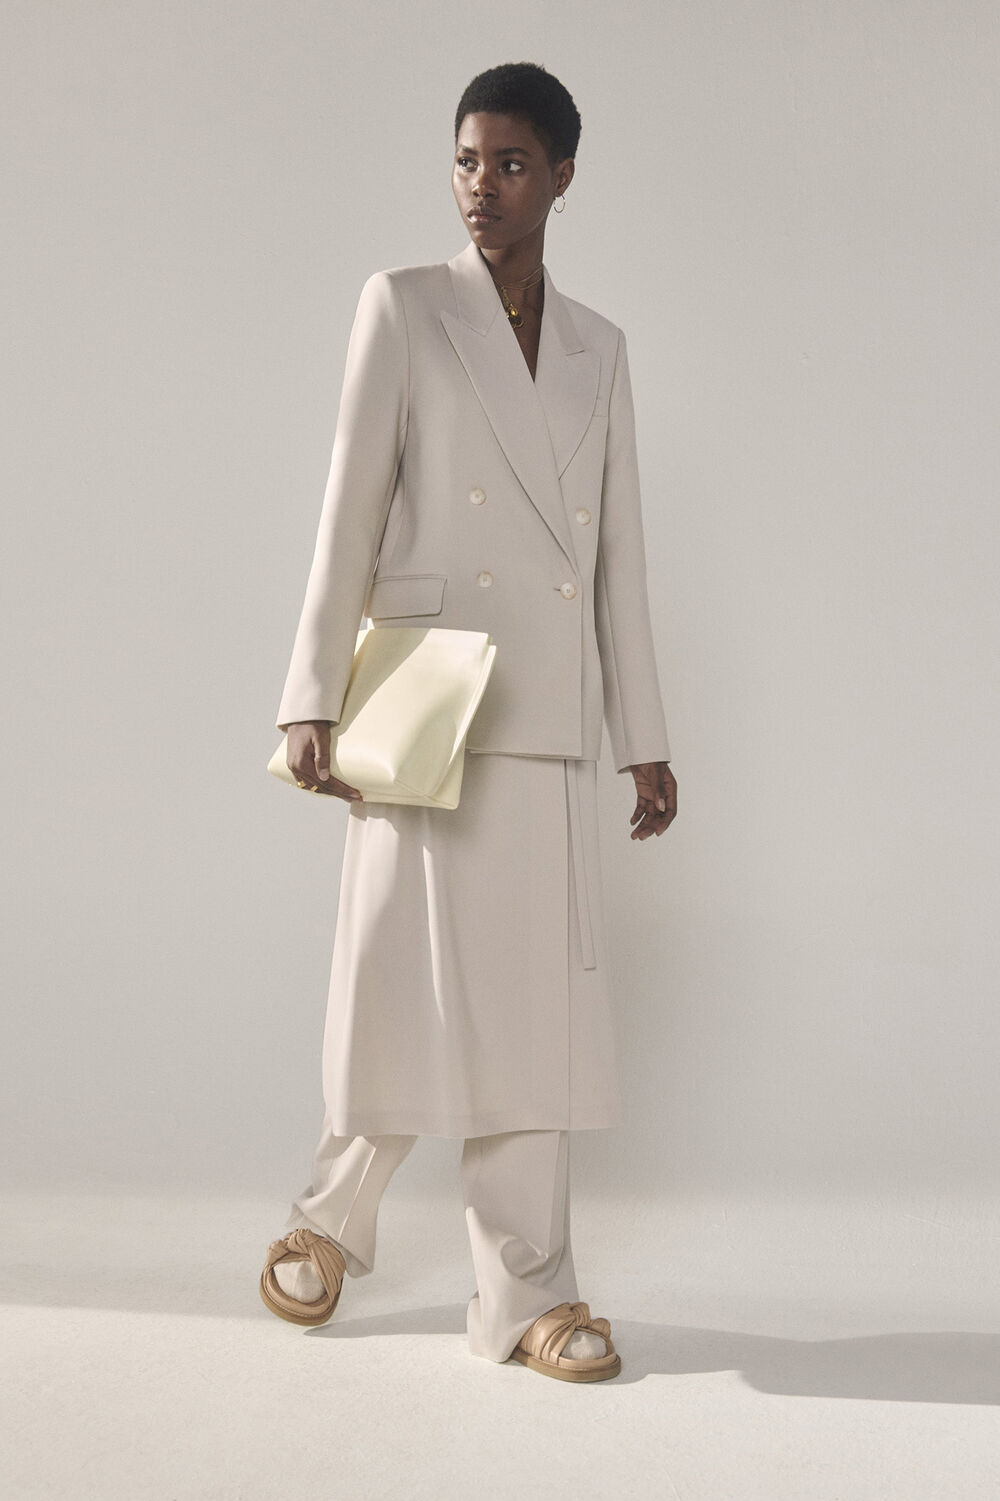 Joseph Tailor Wool Stretch Jaden Jacket / Tailor Wool Stretch Safra Skirt / Tailor Wool Stretch Morissey Trousers / Leather Clutch Bag / Leather Big Knot Sandals